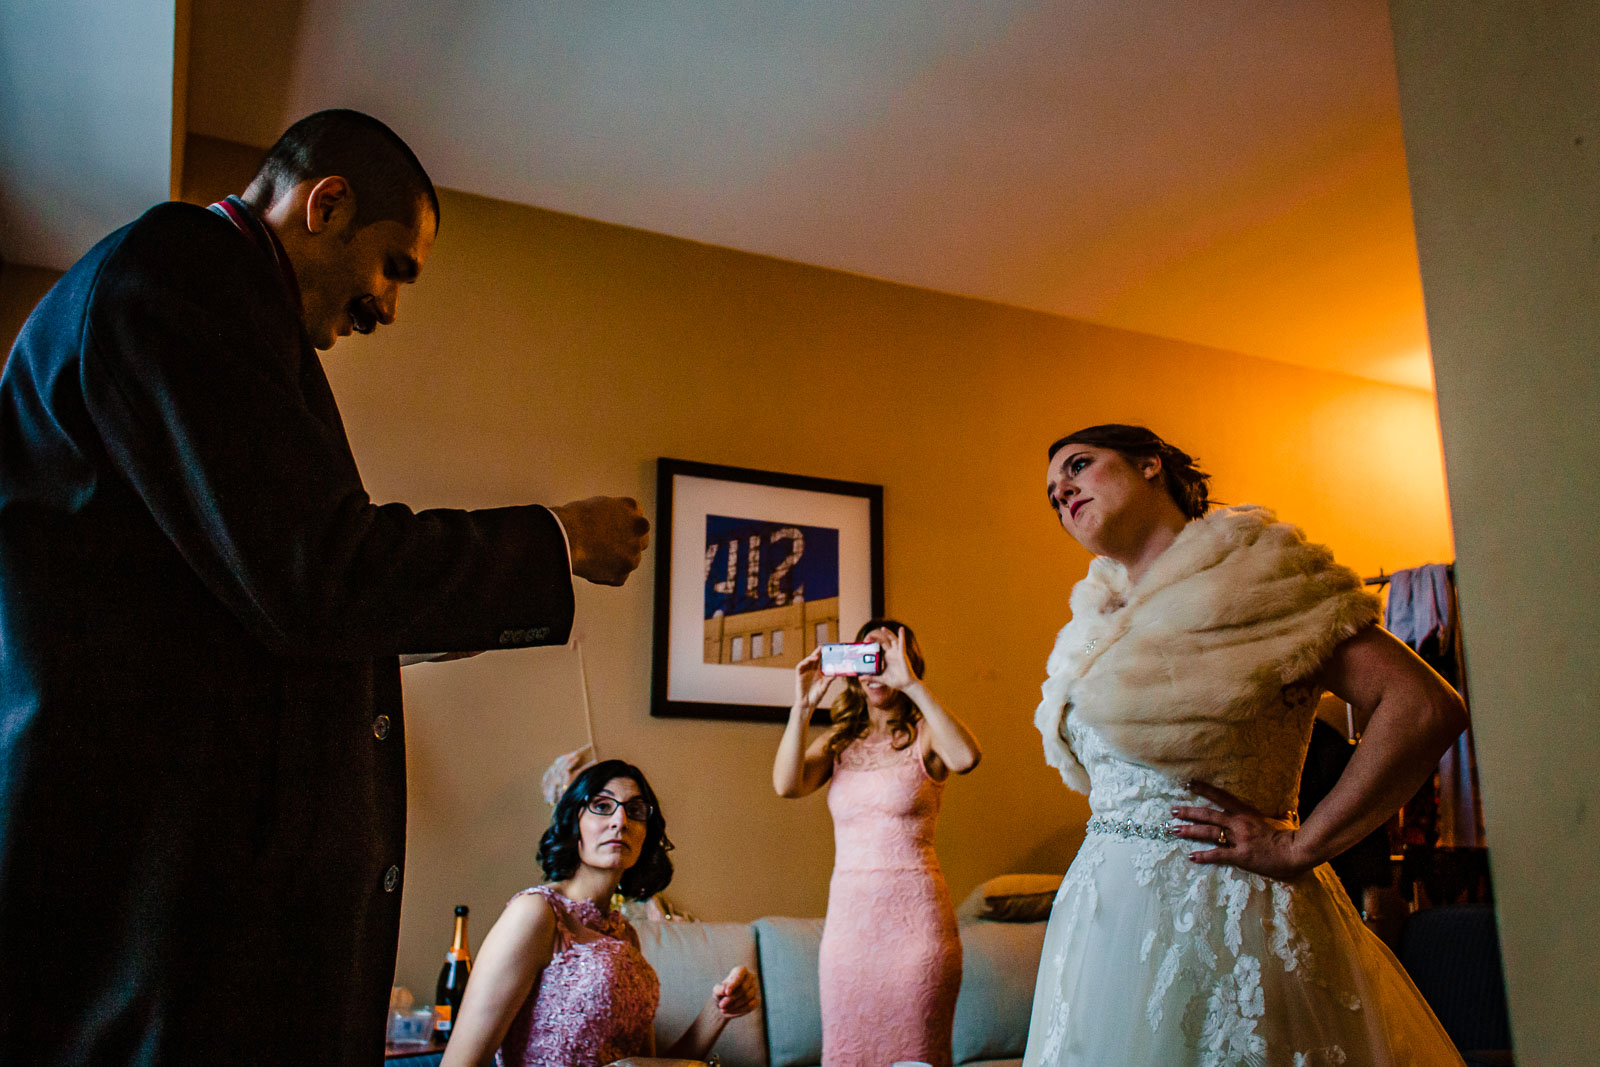 Bride and groom get ready in hotel